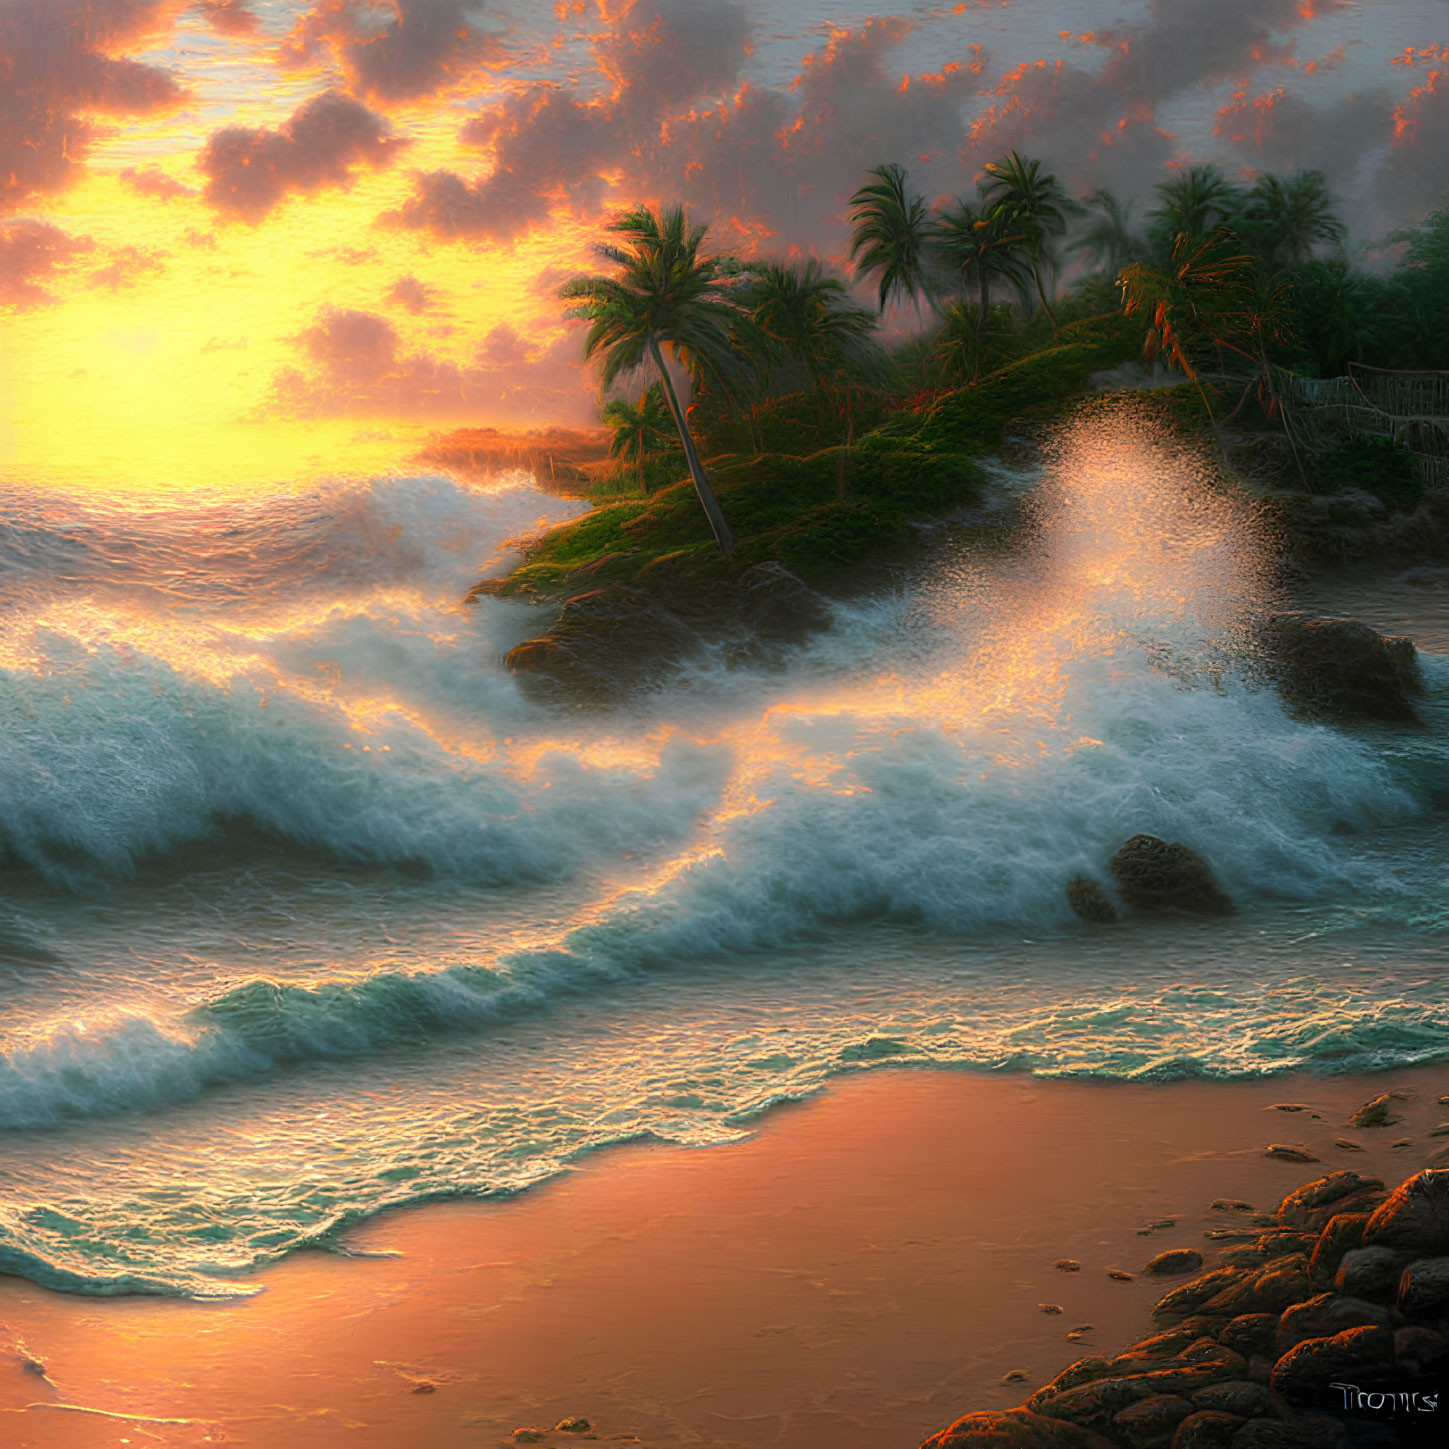 Tropical beach sunset with crashing waves, silhouetted palm trees, and orange sky